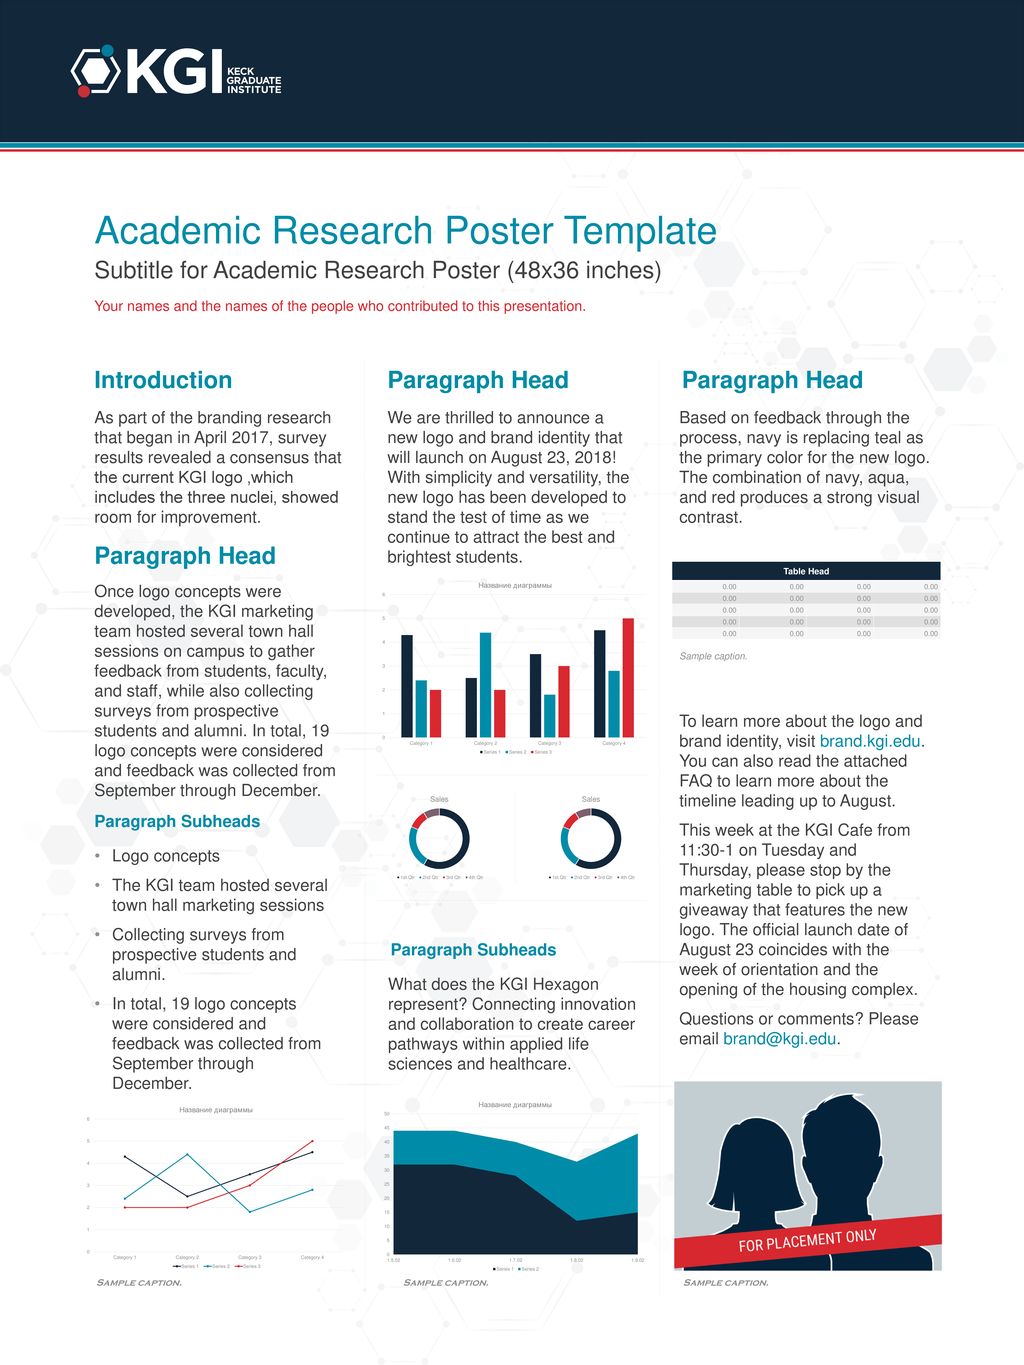 Academic Research Poster Template Ppt Download